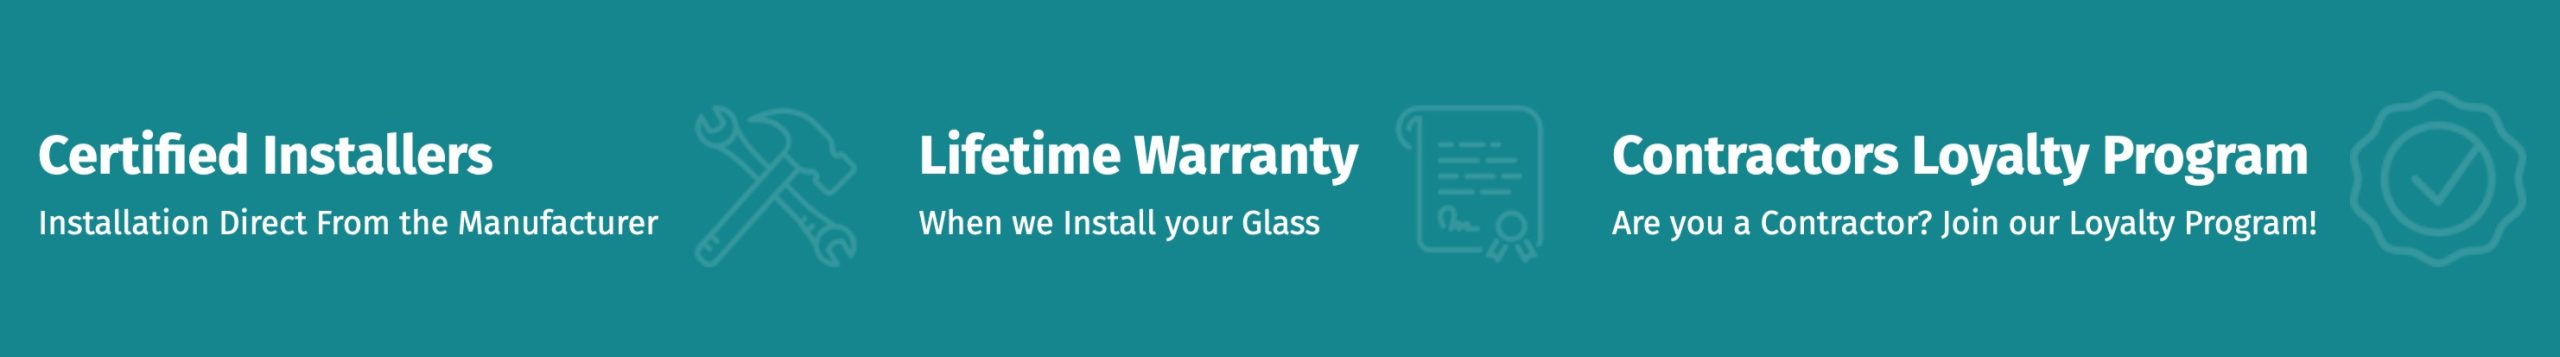 Certified Installers Installation Direct From the Manufacturer | Lifetime Warranty When we Install your Glass | Contractors Loyalty Program Are you a Contractor? Join our Loyalty Program!